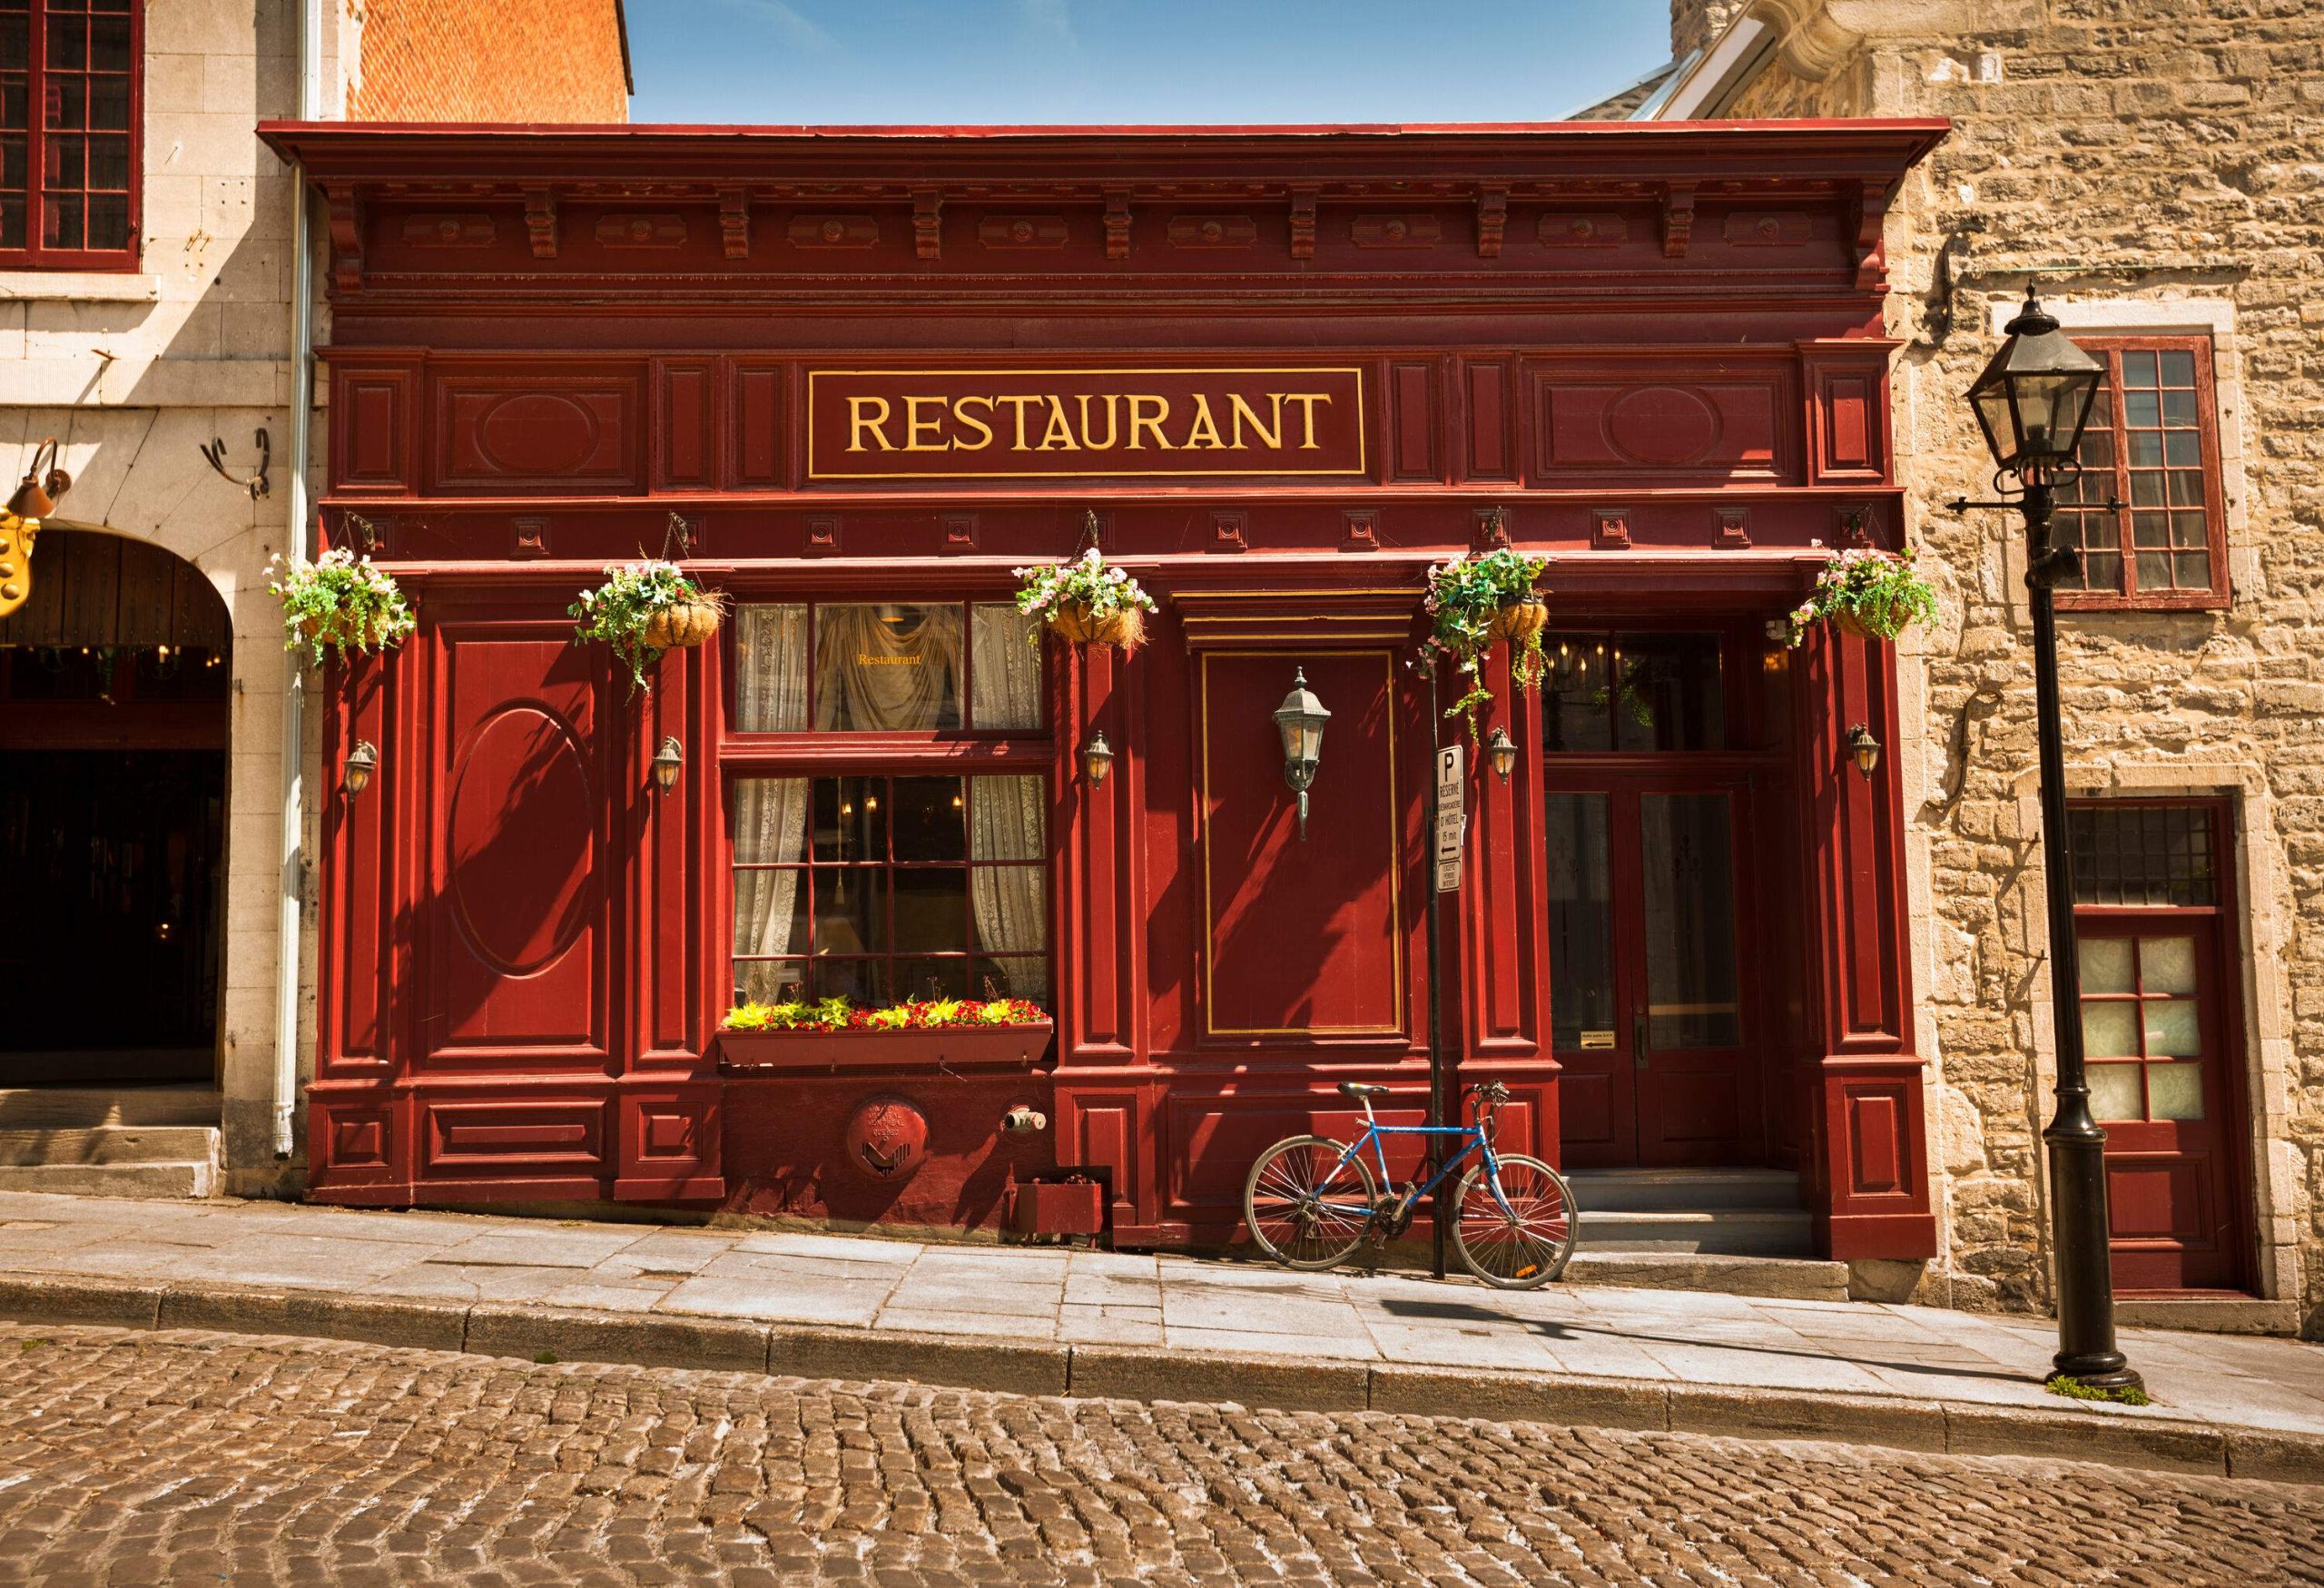 A classic French-style restaurant with a bicycle parked against the exterior wall.